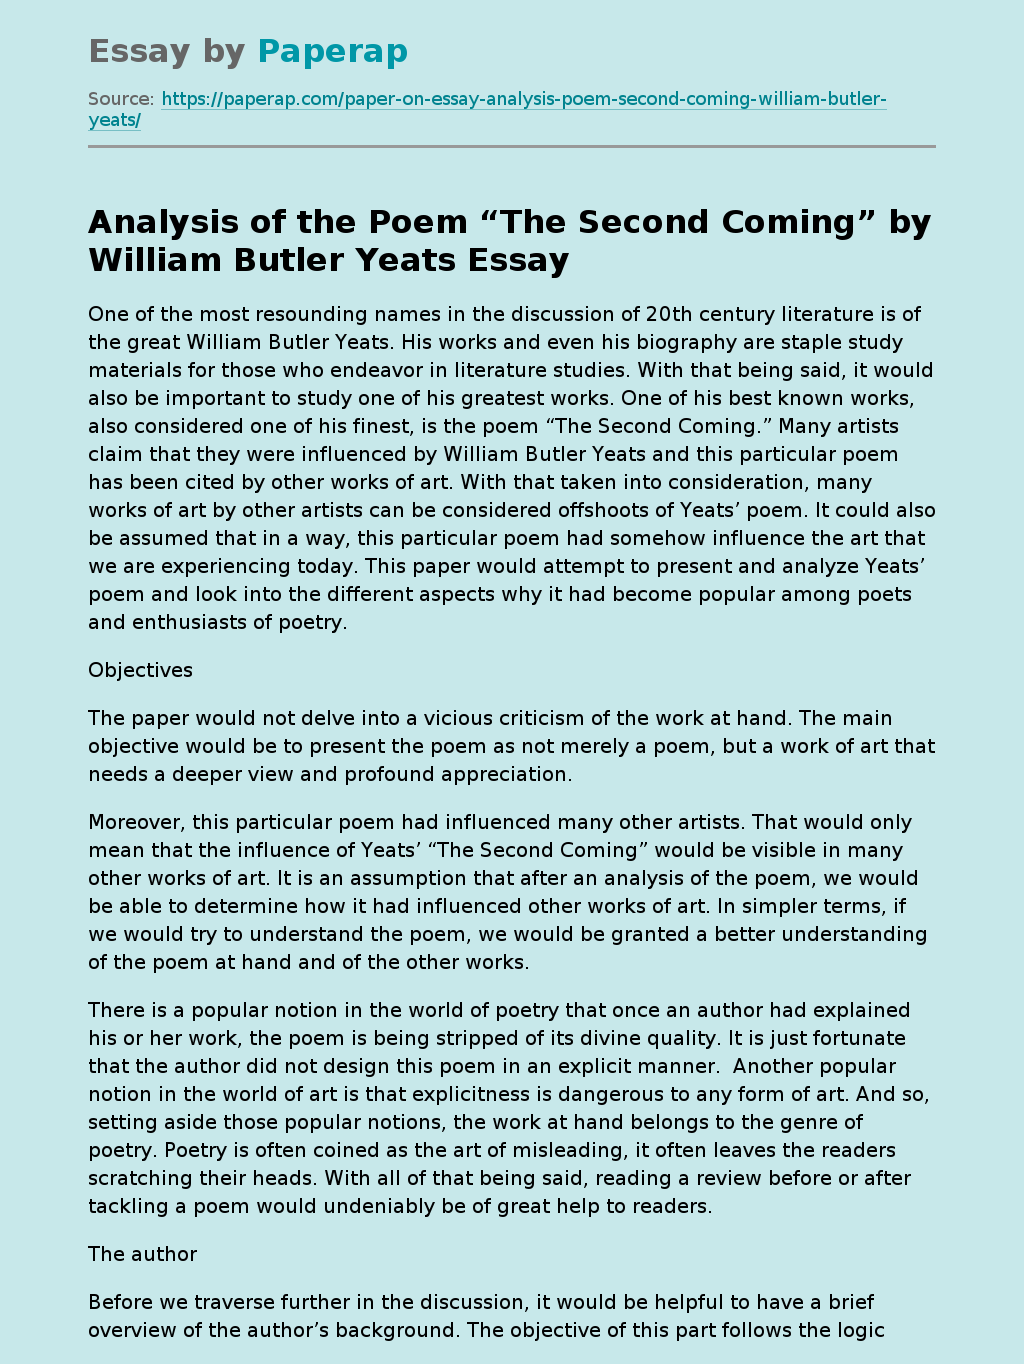 Analysis of the Poem “The Second Coming” by William Butler Yeats